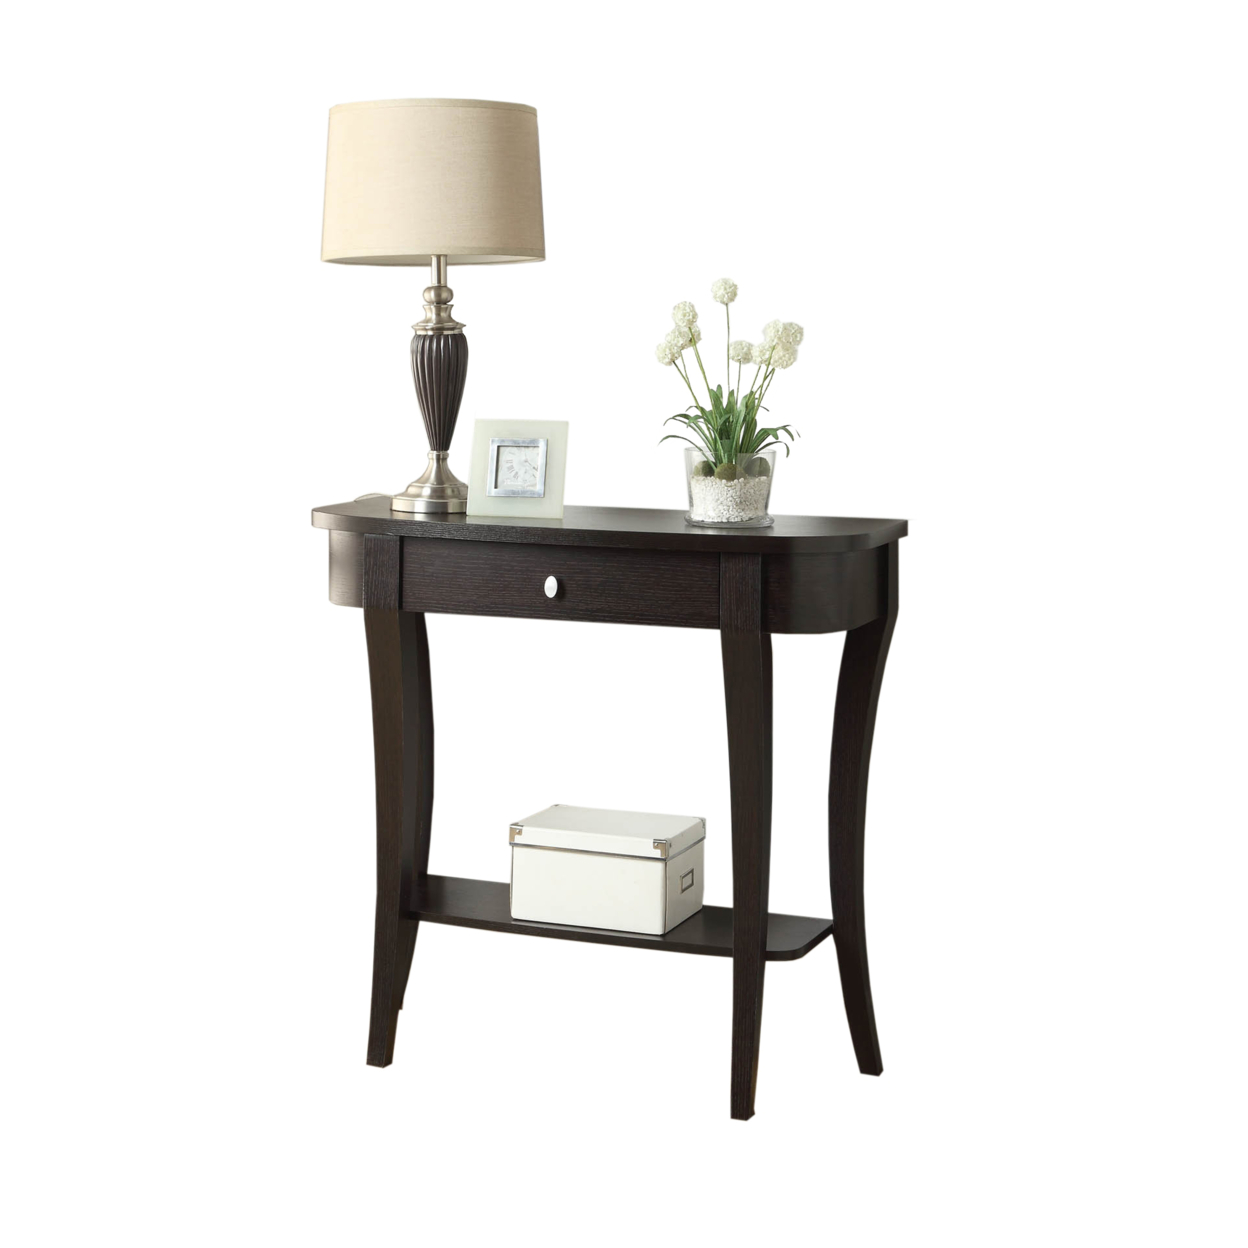 Convenience Concepts Newport Entryway Console Table, Multiple Finishes - image 2 of 2